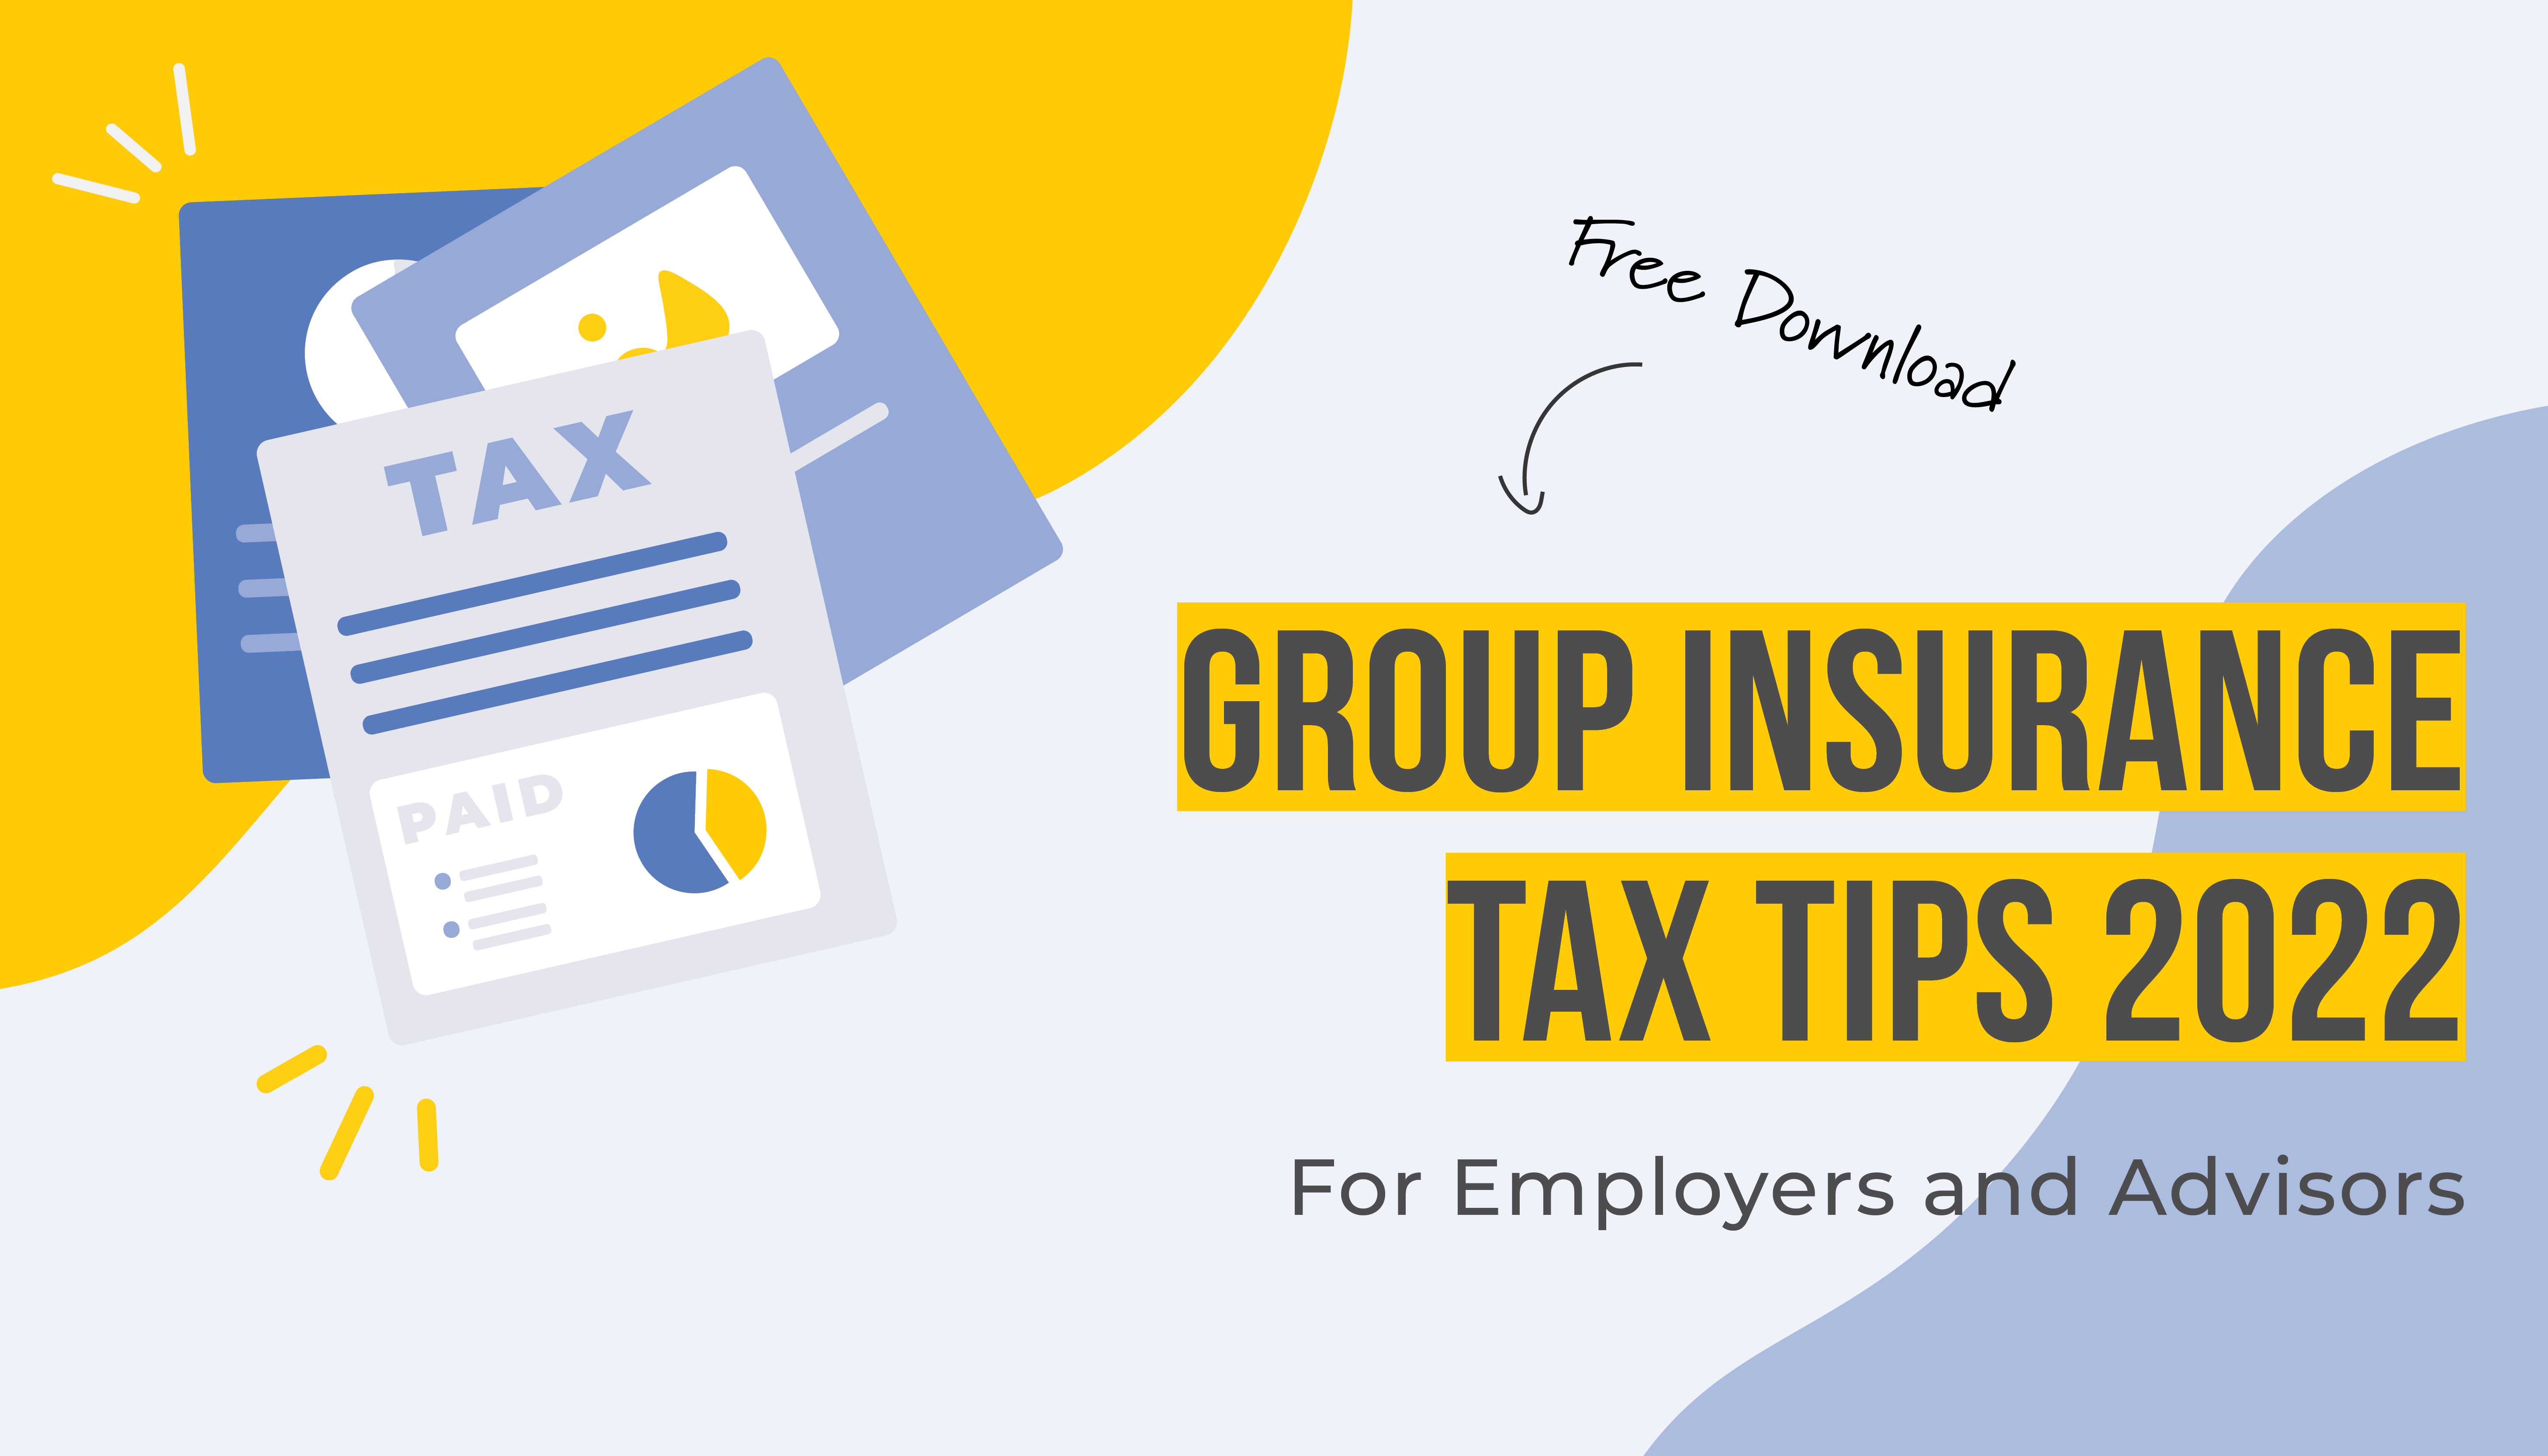 [Free Download] Group Insurance Tax Tips 2022 for Employers and Advisors | Benefits by Design